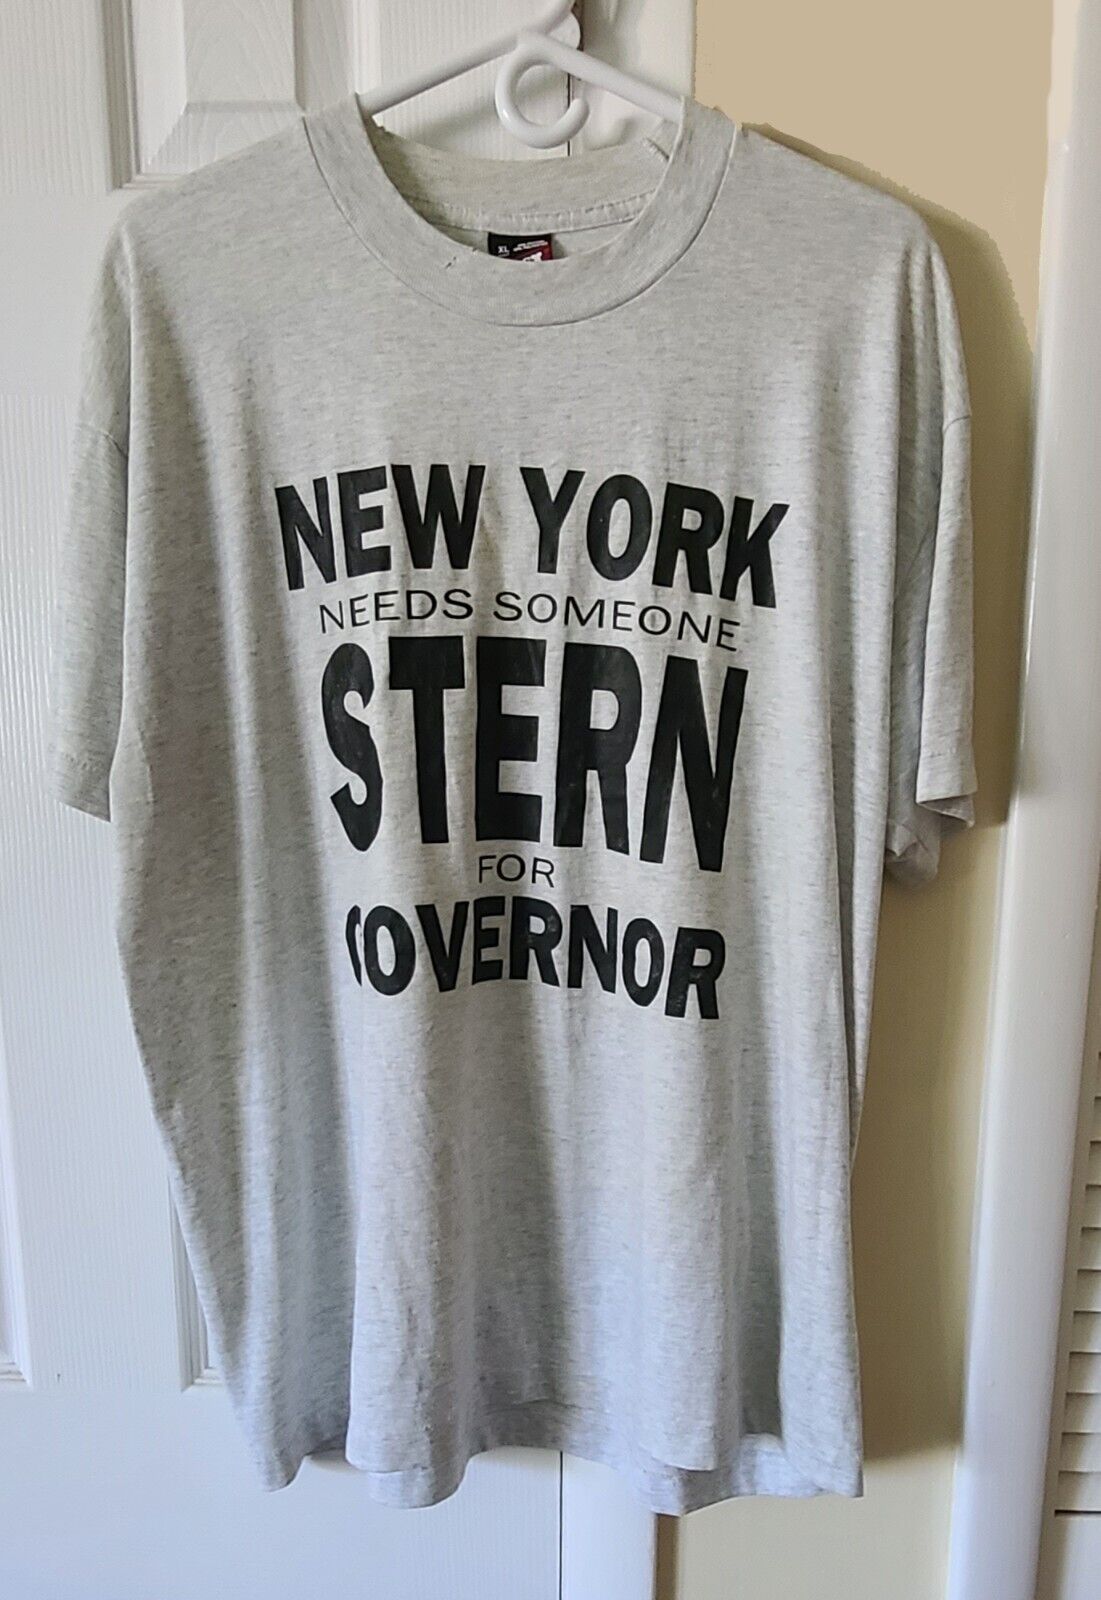 Howard Stern for Governor 1994 Collectible T-shirt Gray XL New York Needs Stern